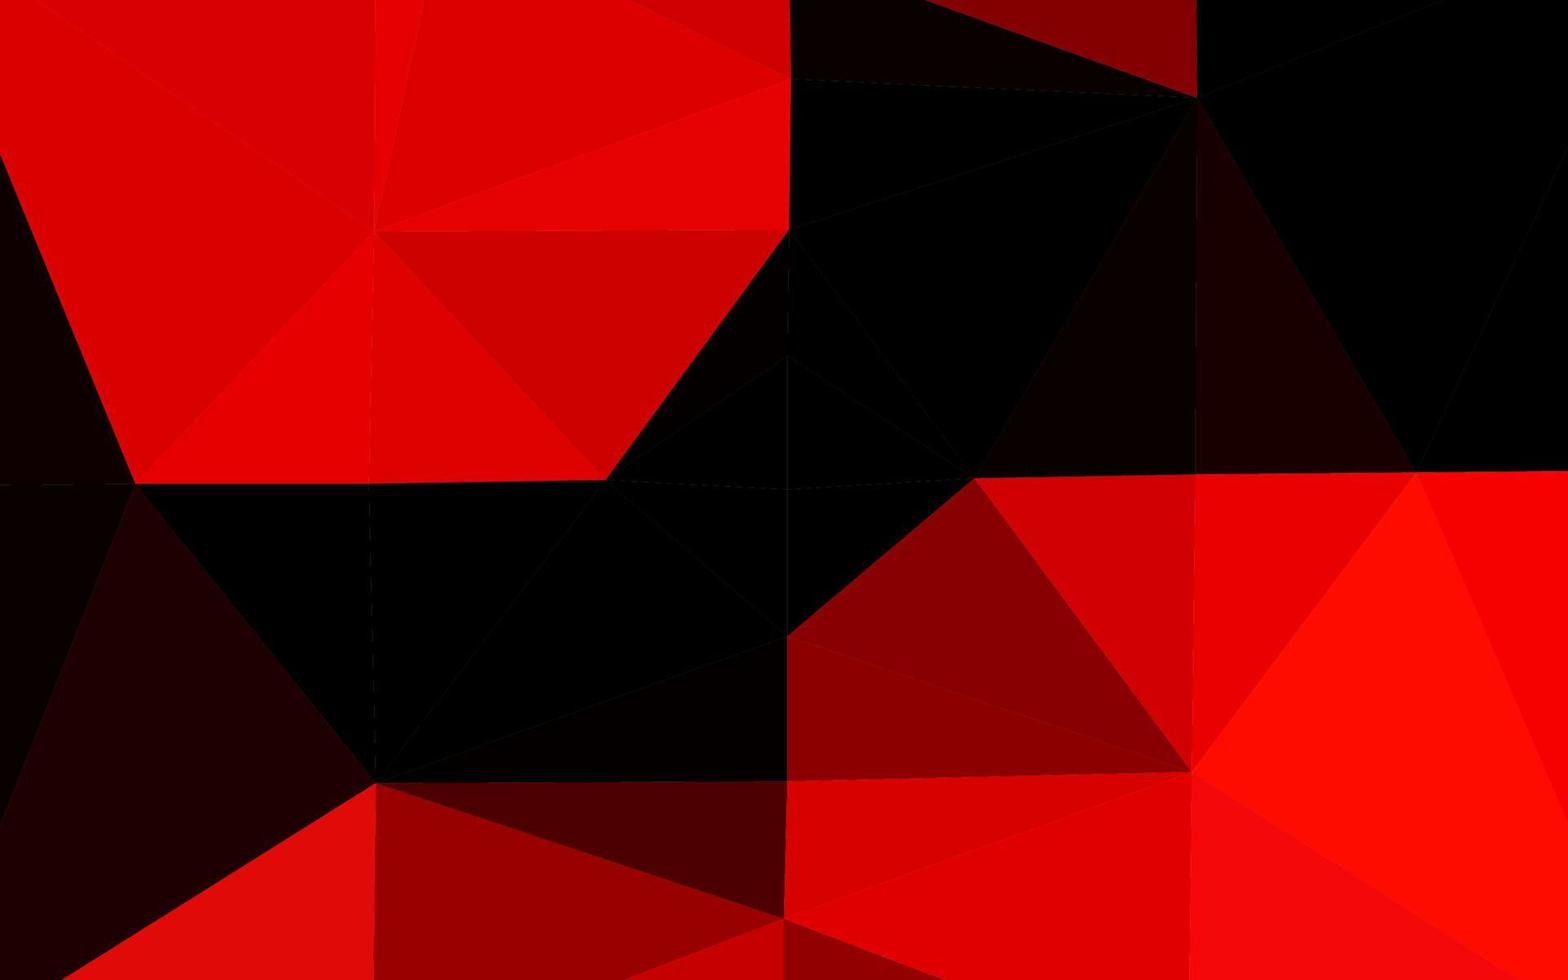 Light Red vector abstract mosaic pattern.